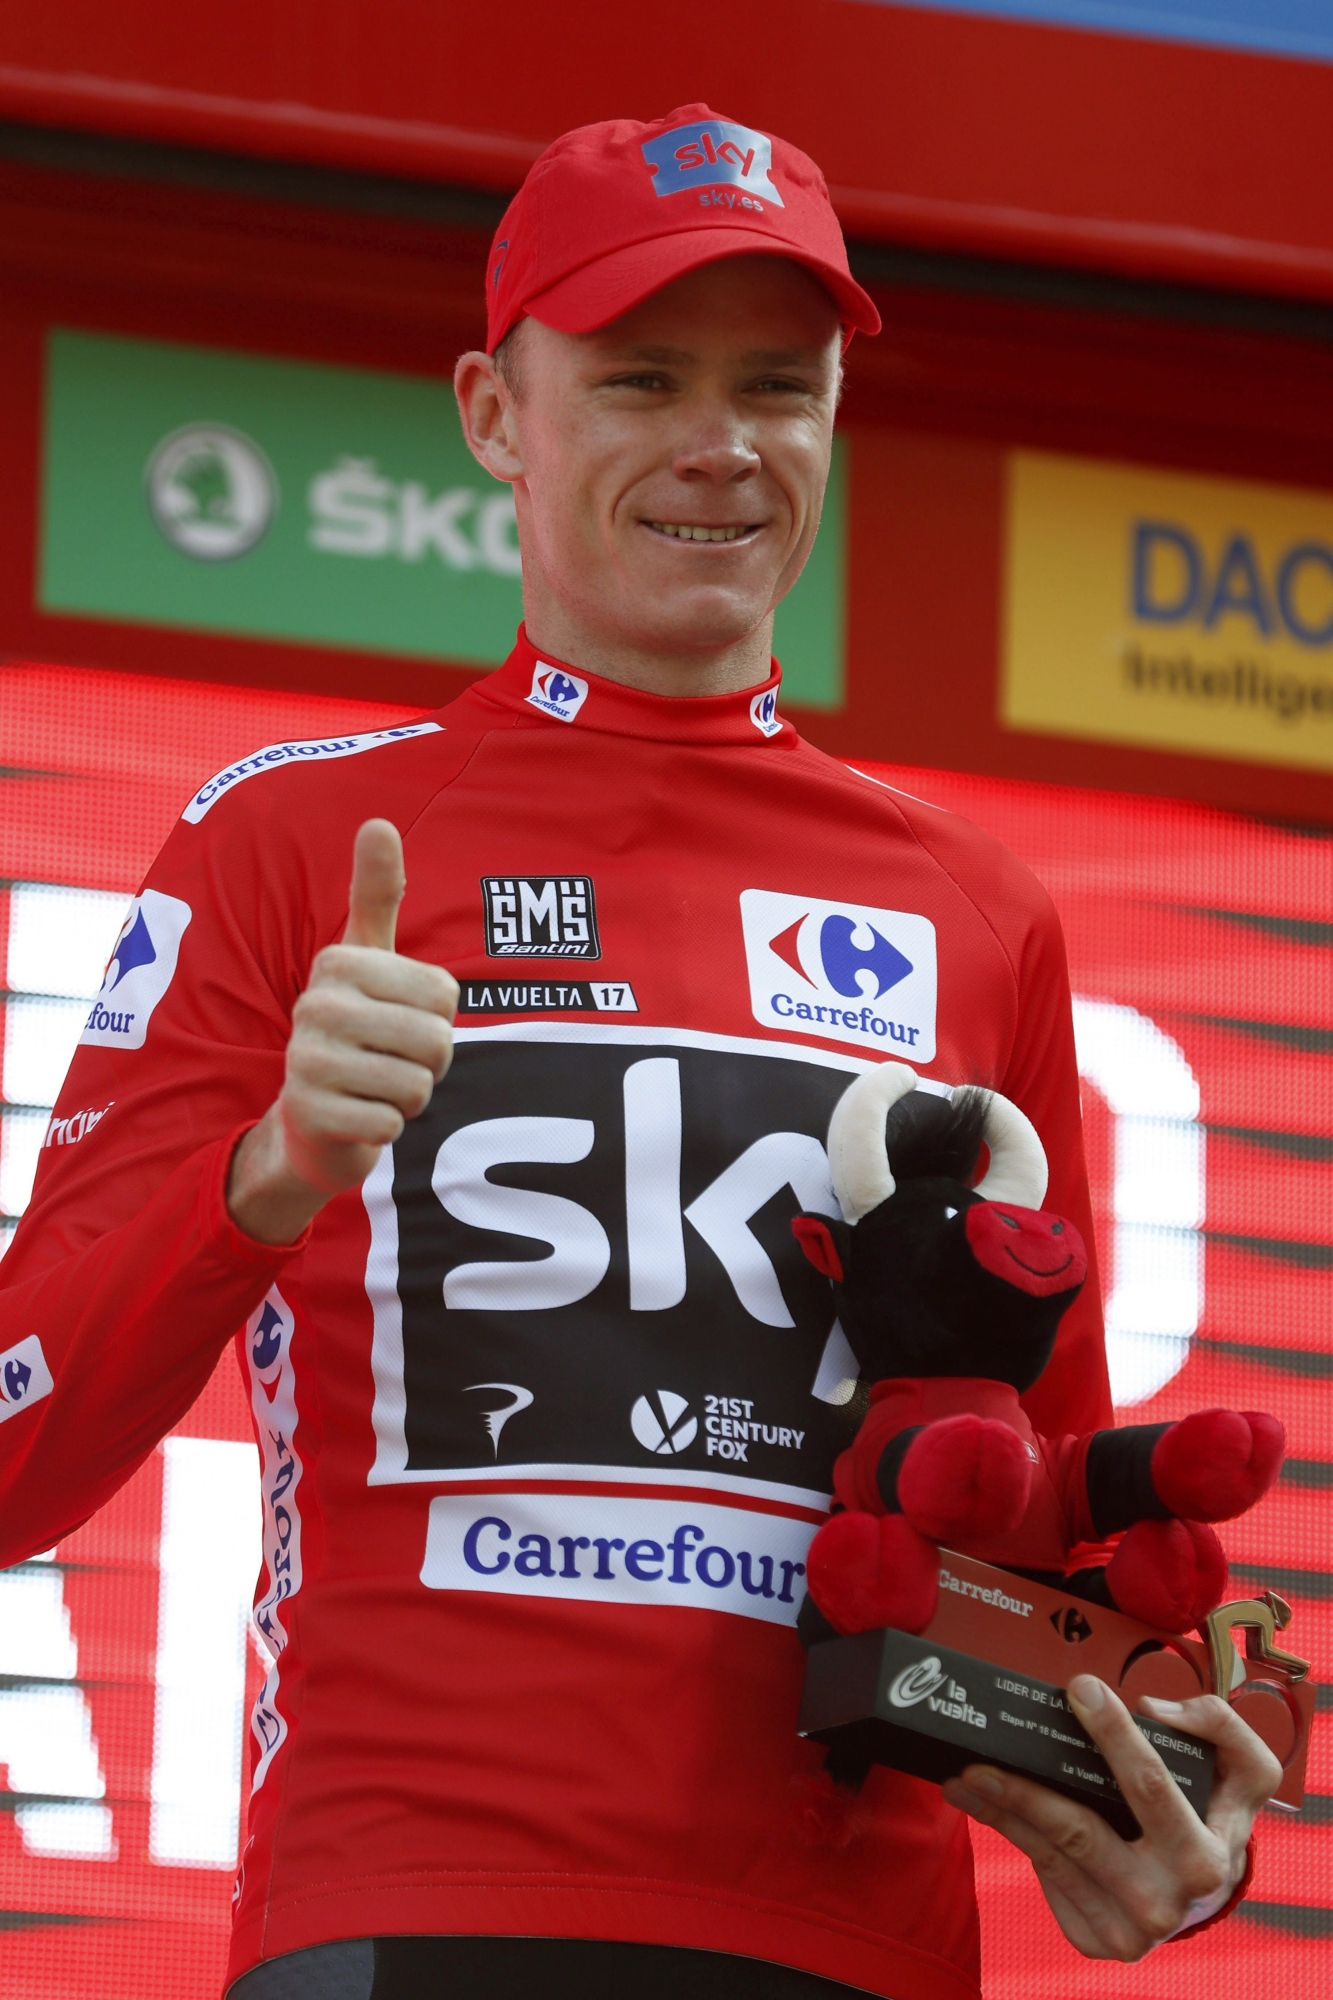 epa06386395 (FILE) - British cyclist Chris Froome of Sky Team celebrates on the podium retaining the overall leader's red jersey after the 18th stage of the Vuelta a Espana cycling race, over 169km from Suances to Santo Toribio de Liebana, Spain, 07 September 2017(reissued 13 December 2017). According to news reports, Froome had failed a drug test during the La Vuelta cycling tour in September 2017, testing positive for an excessive level of a legal asthma drug.  EPA/Javier Lizon (FILE) SPAIN CYCLING VUELTA FROOME